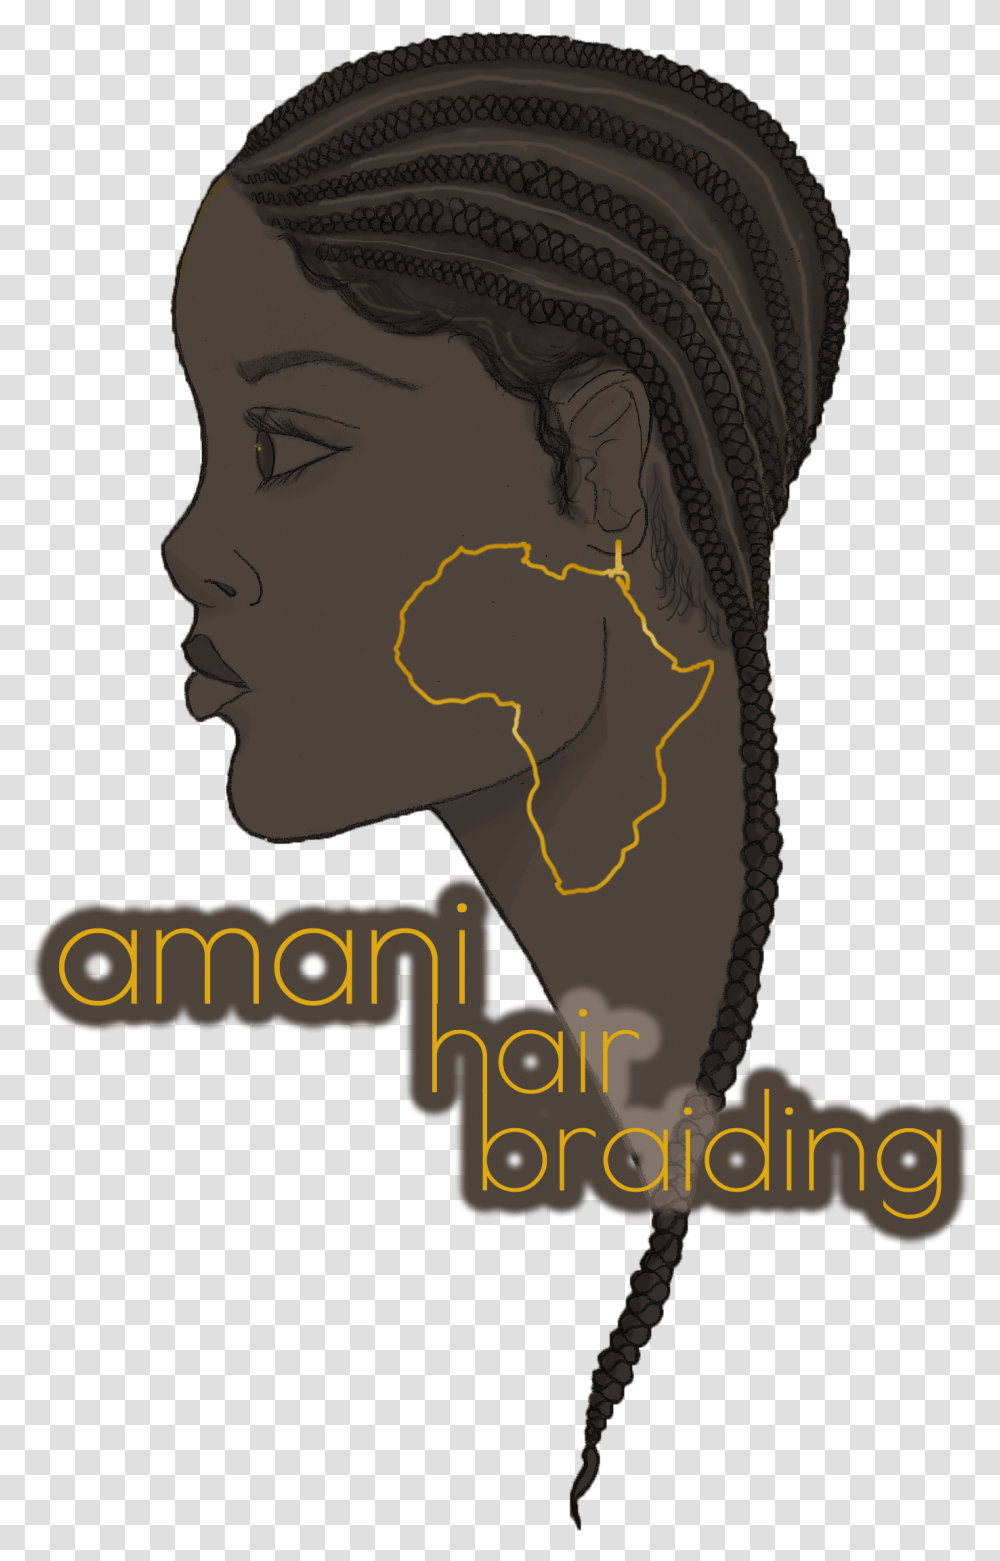 Download Logo For Hair Braid Full Size Image Pngkit Braid Hair Logo, Clothing, Apparel, Head, Face Transparent Png